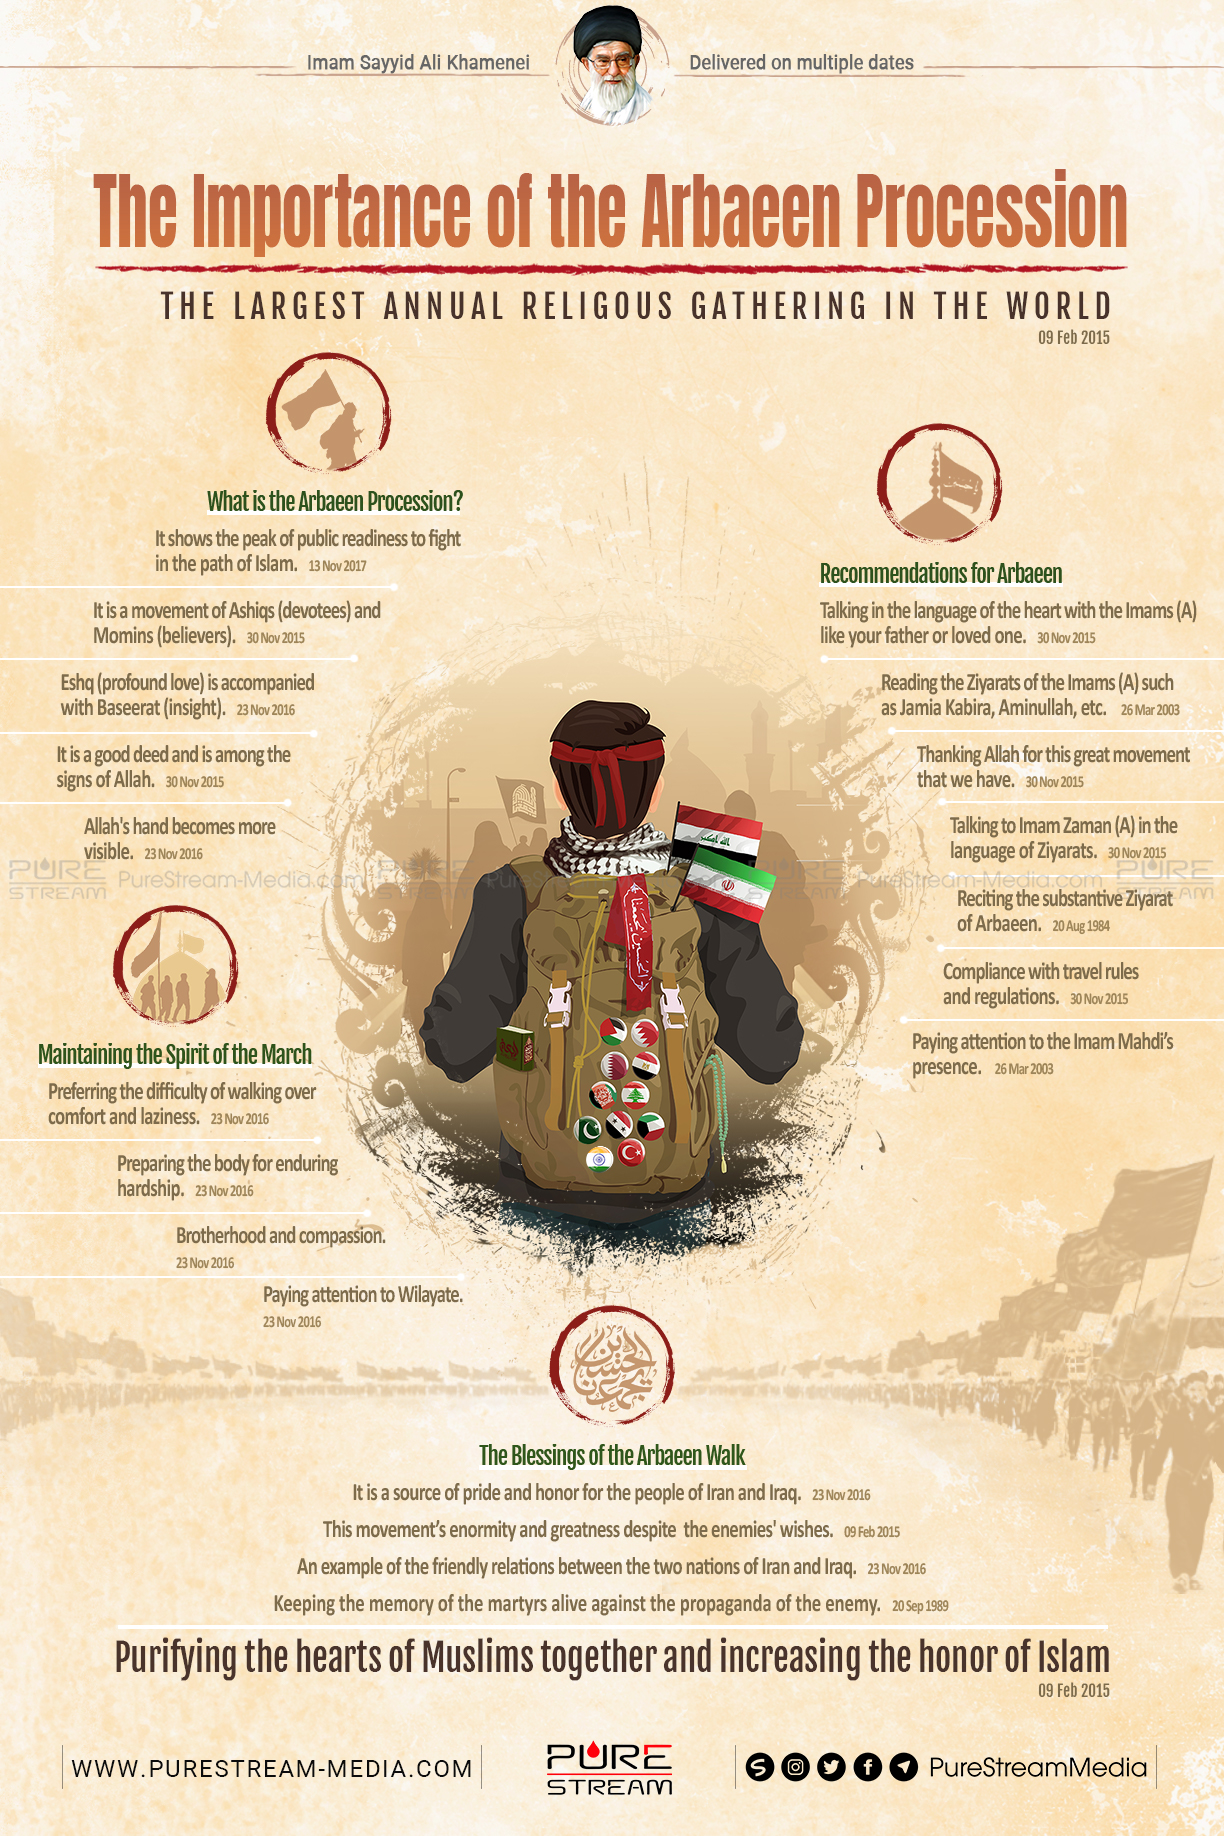 The Importance of the Arbaeen Procession | Infographic